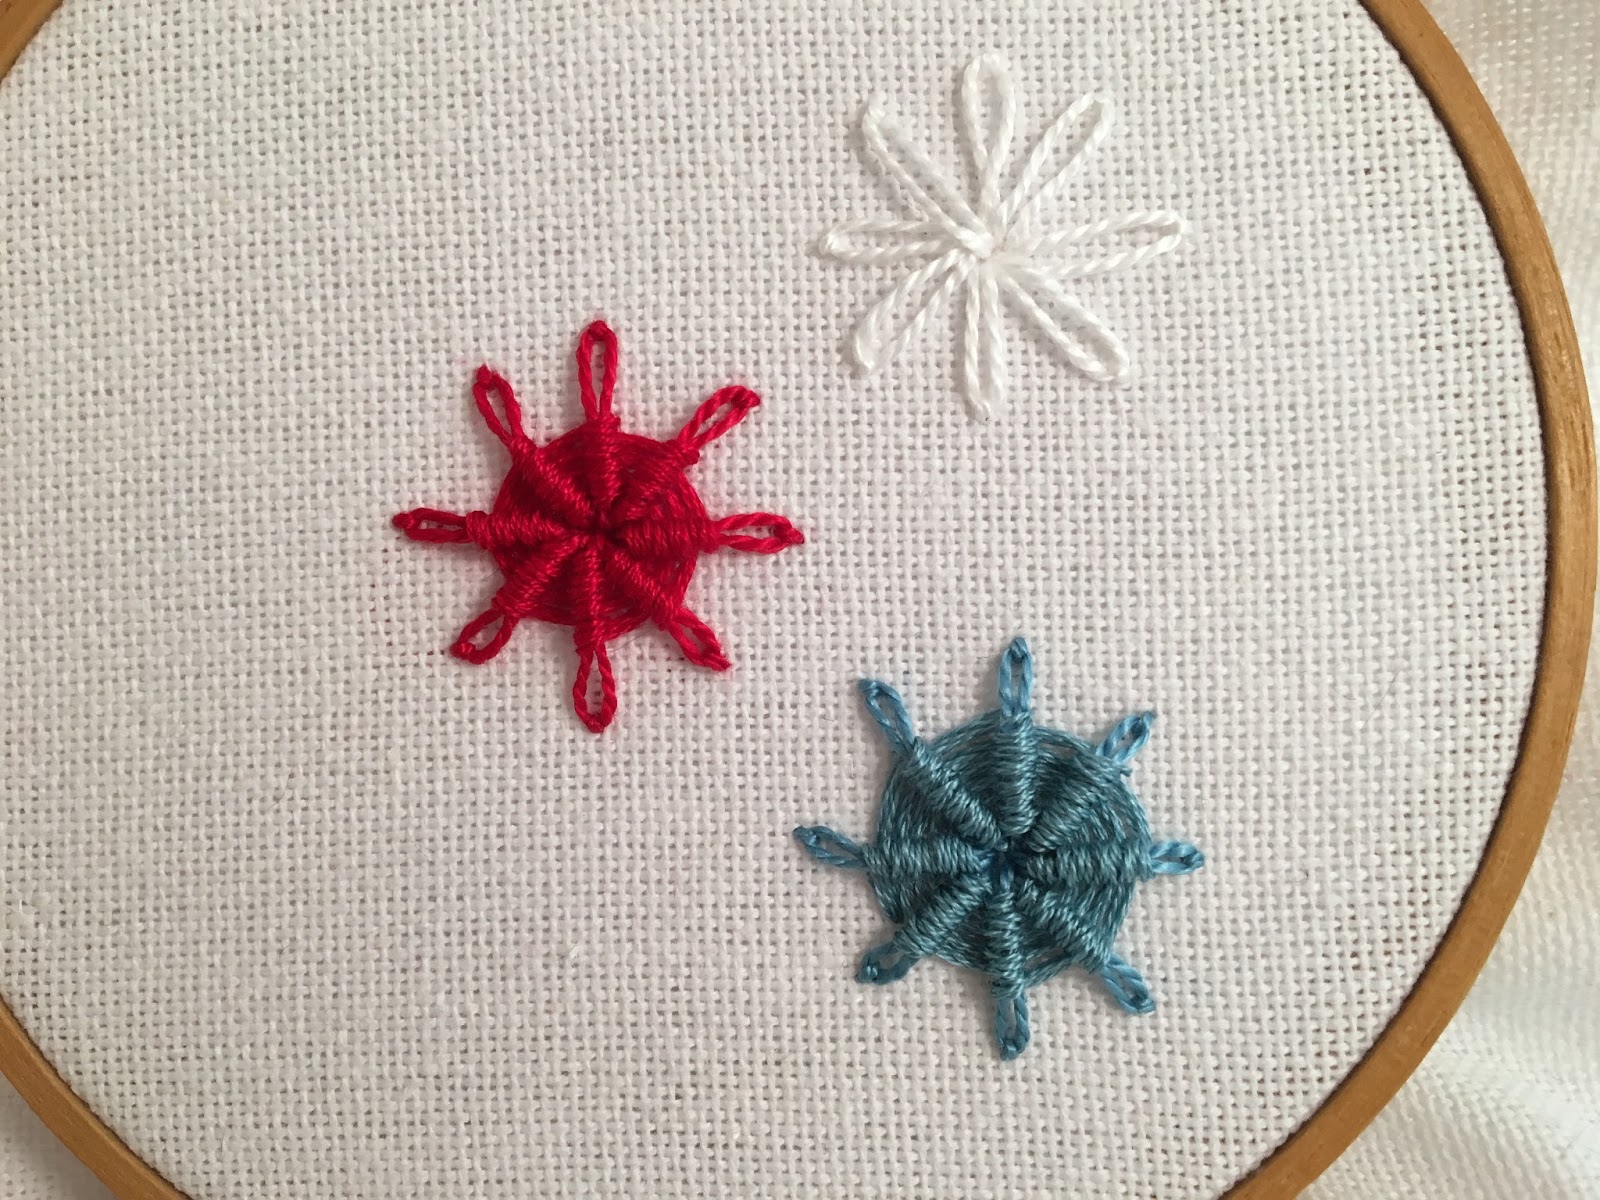 Whipped Lazy Daisy stitch, a tutorial by Michelle for Mooshiestitch Monday on Feeling Stitchy